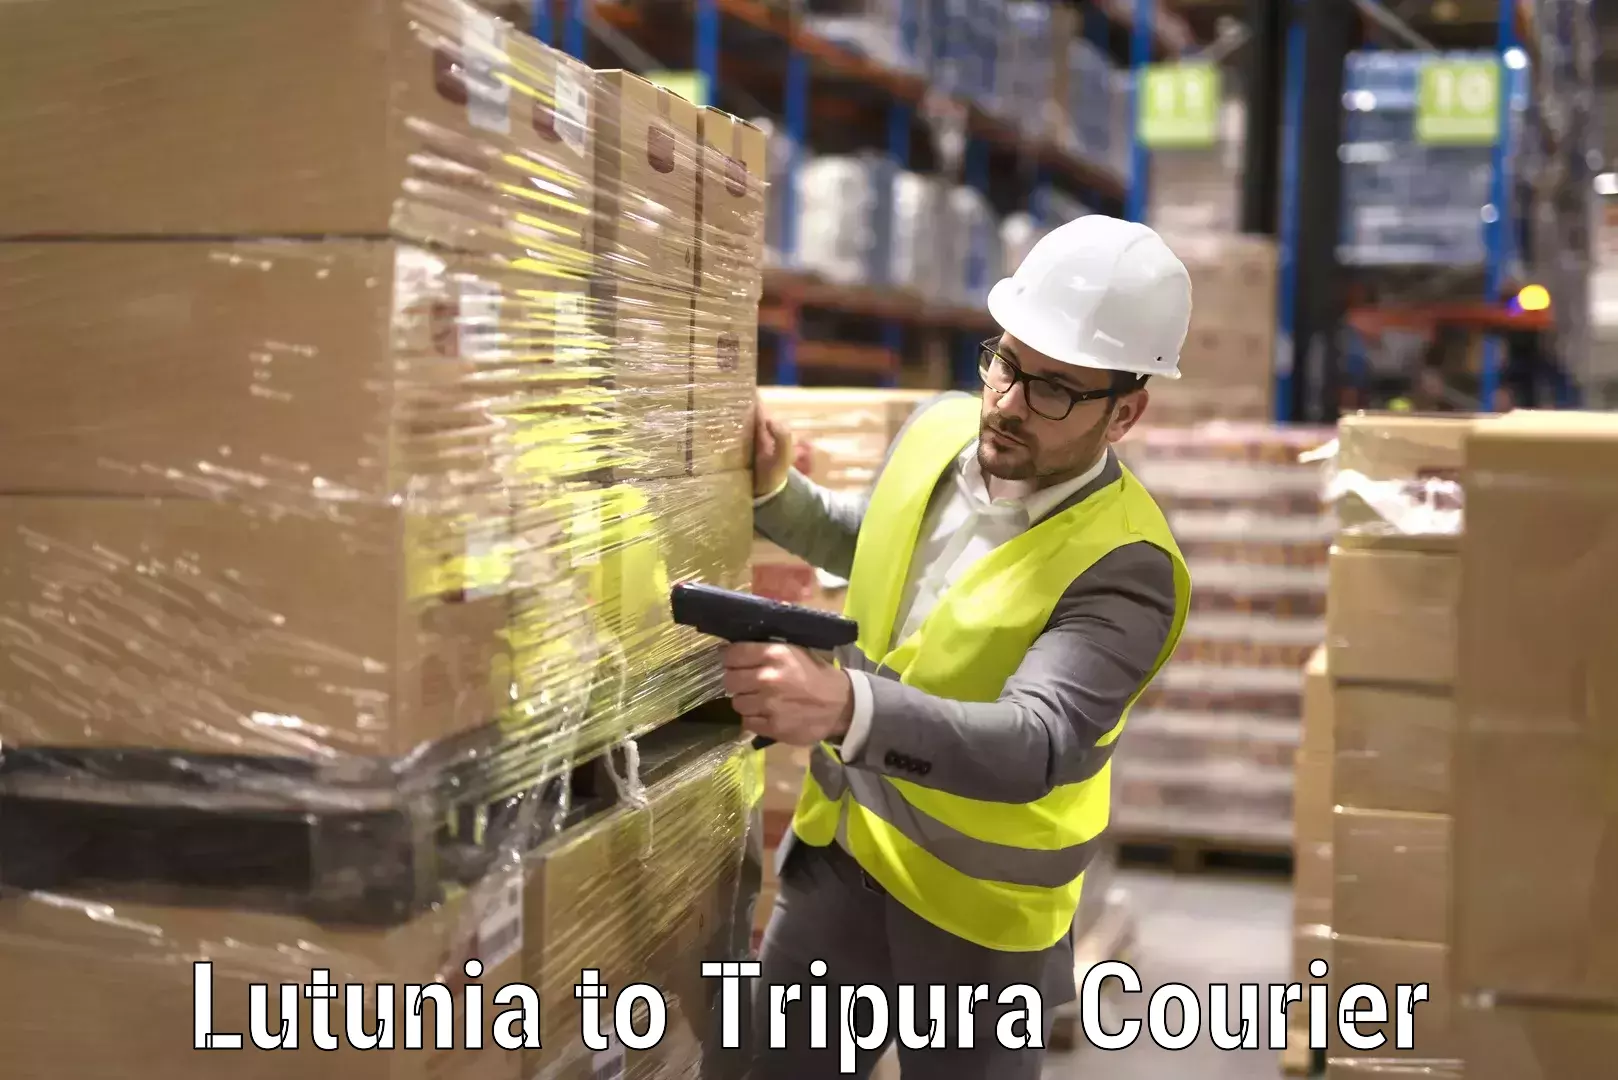 Specialized moving company Lutunia to Tripura